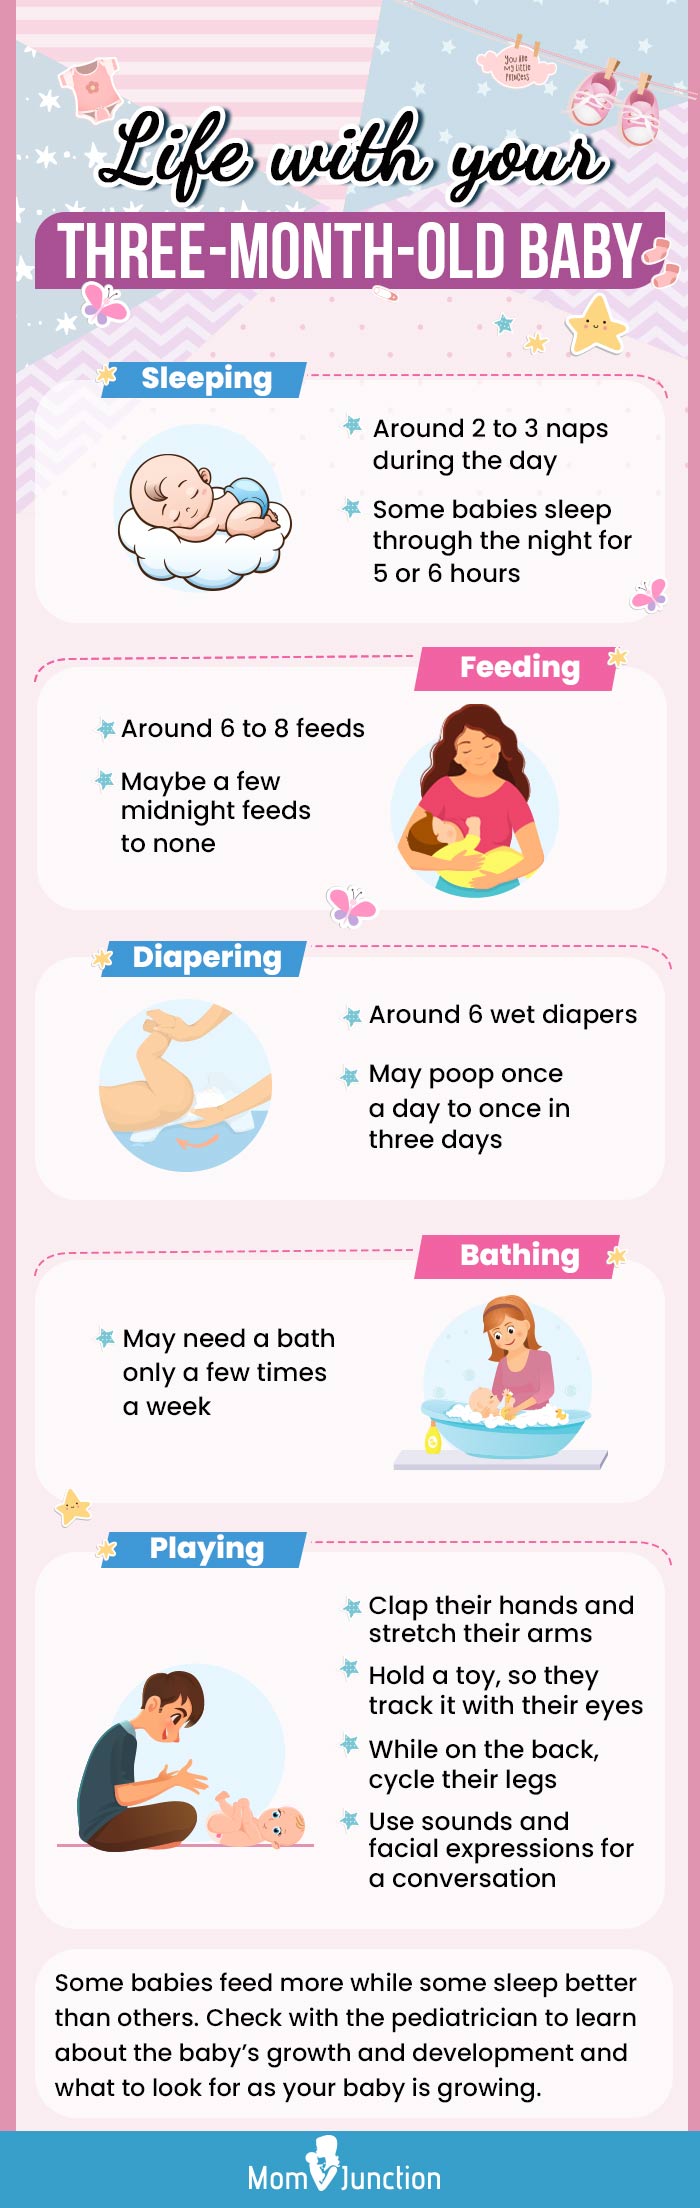 life with your three month old baby [infographic]